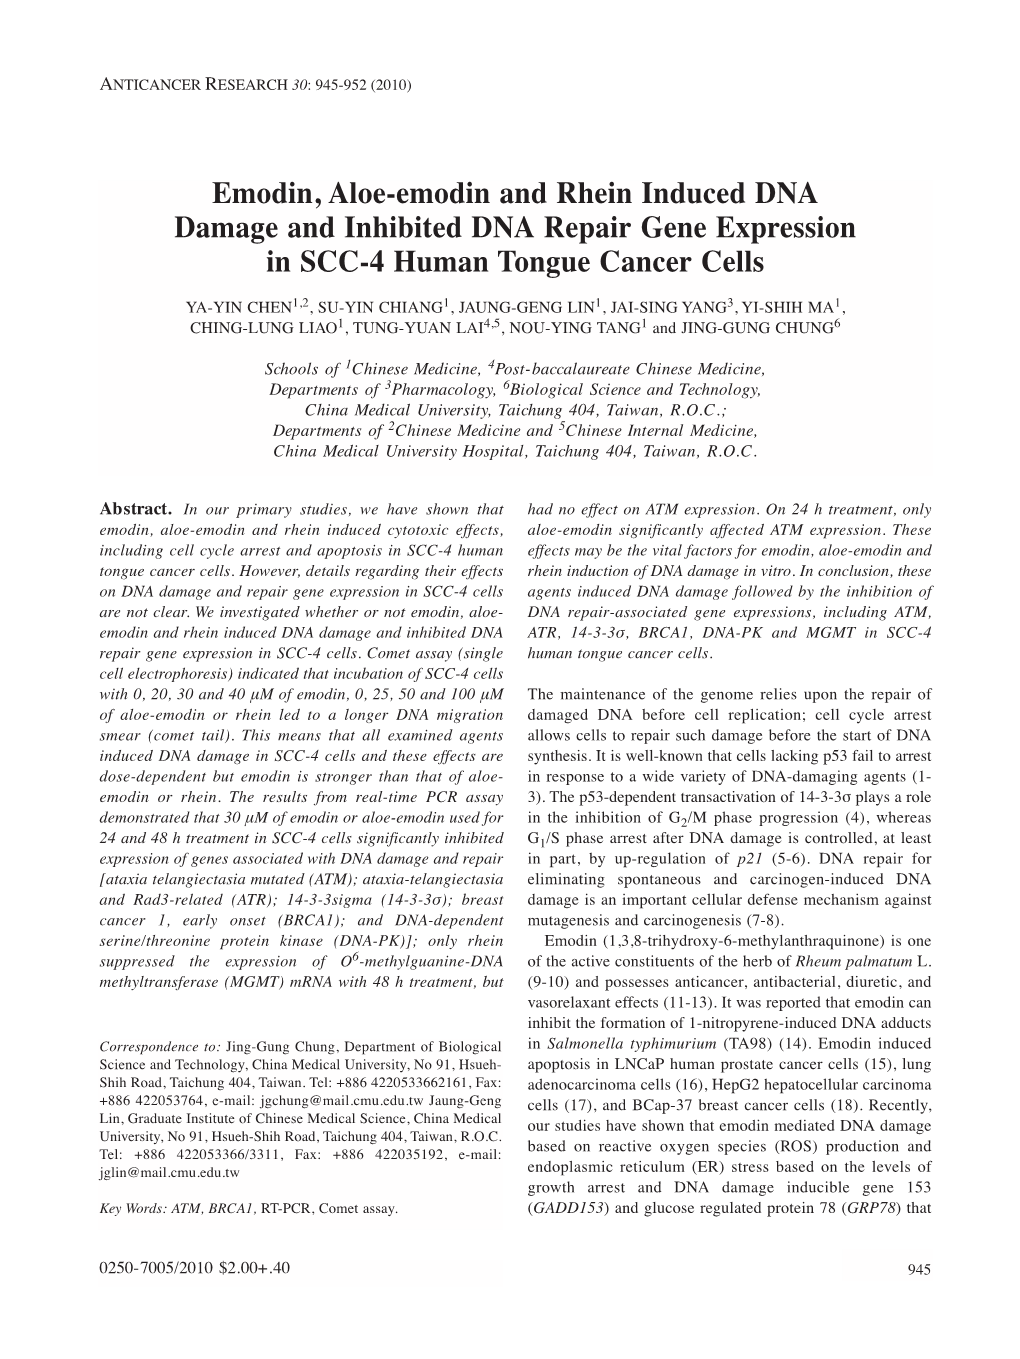 Emodin, Aloe-Emodin and Rhein Induced DNA Damage and Inhibited DNA Repair Gene Expression in SCC-4 Human Tongue Cancer Cells